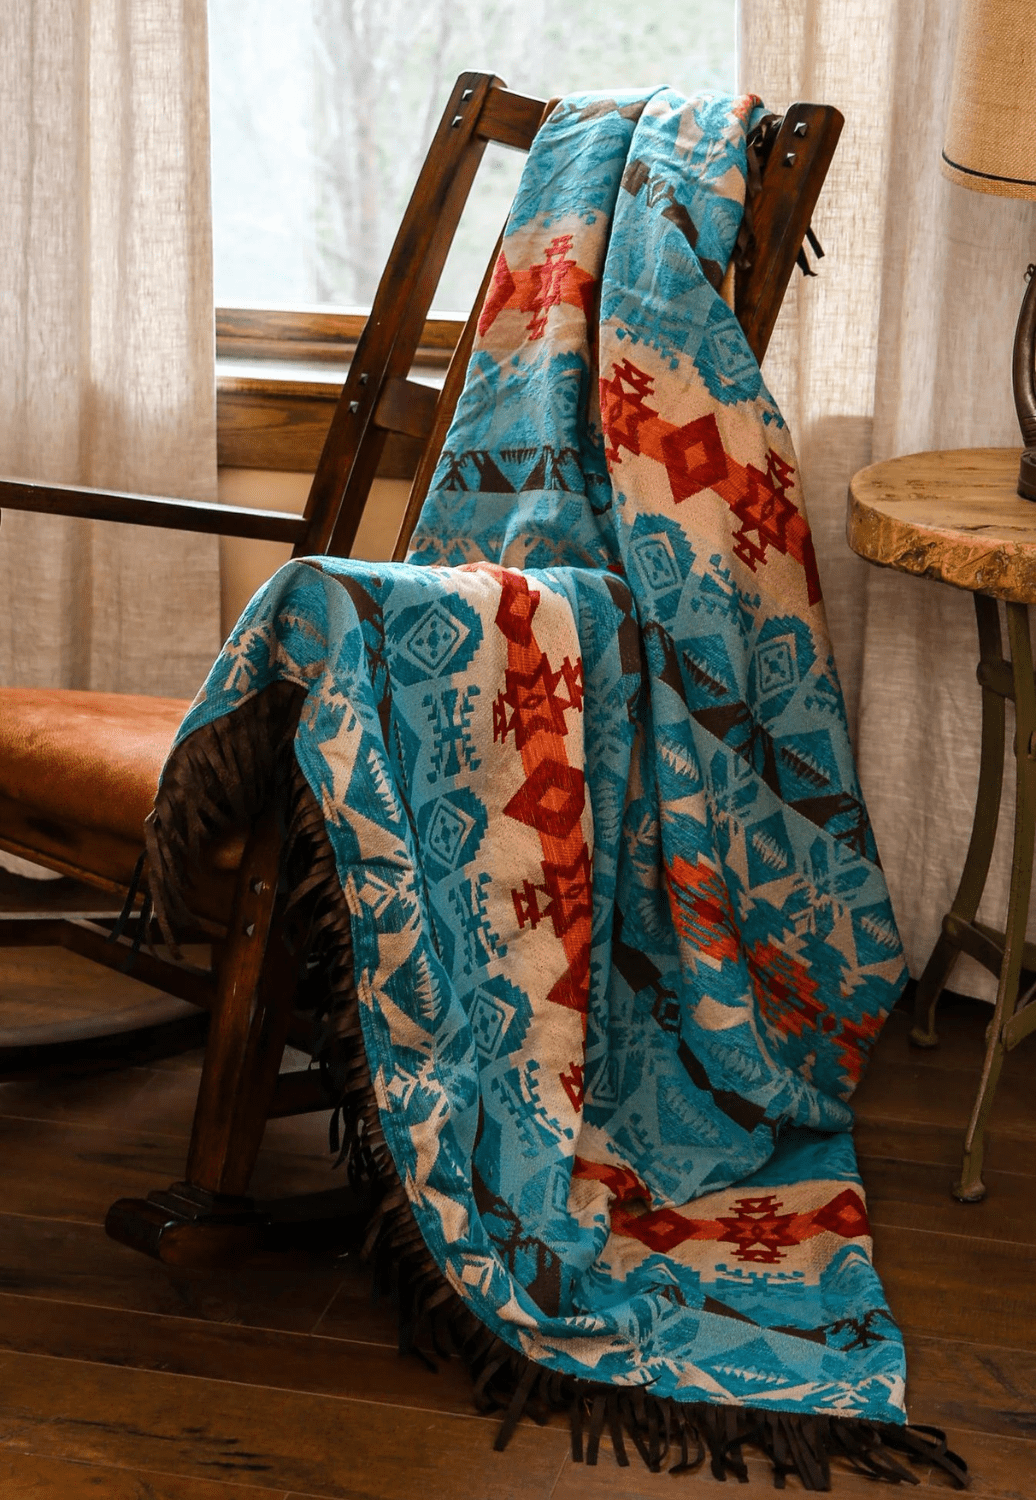 Carstens Homewares - General Turquoise Carstens Chamarro Throw